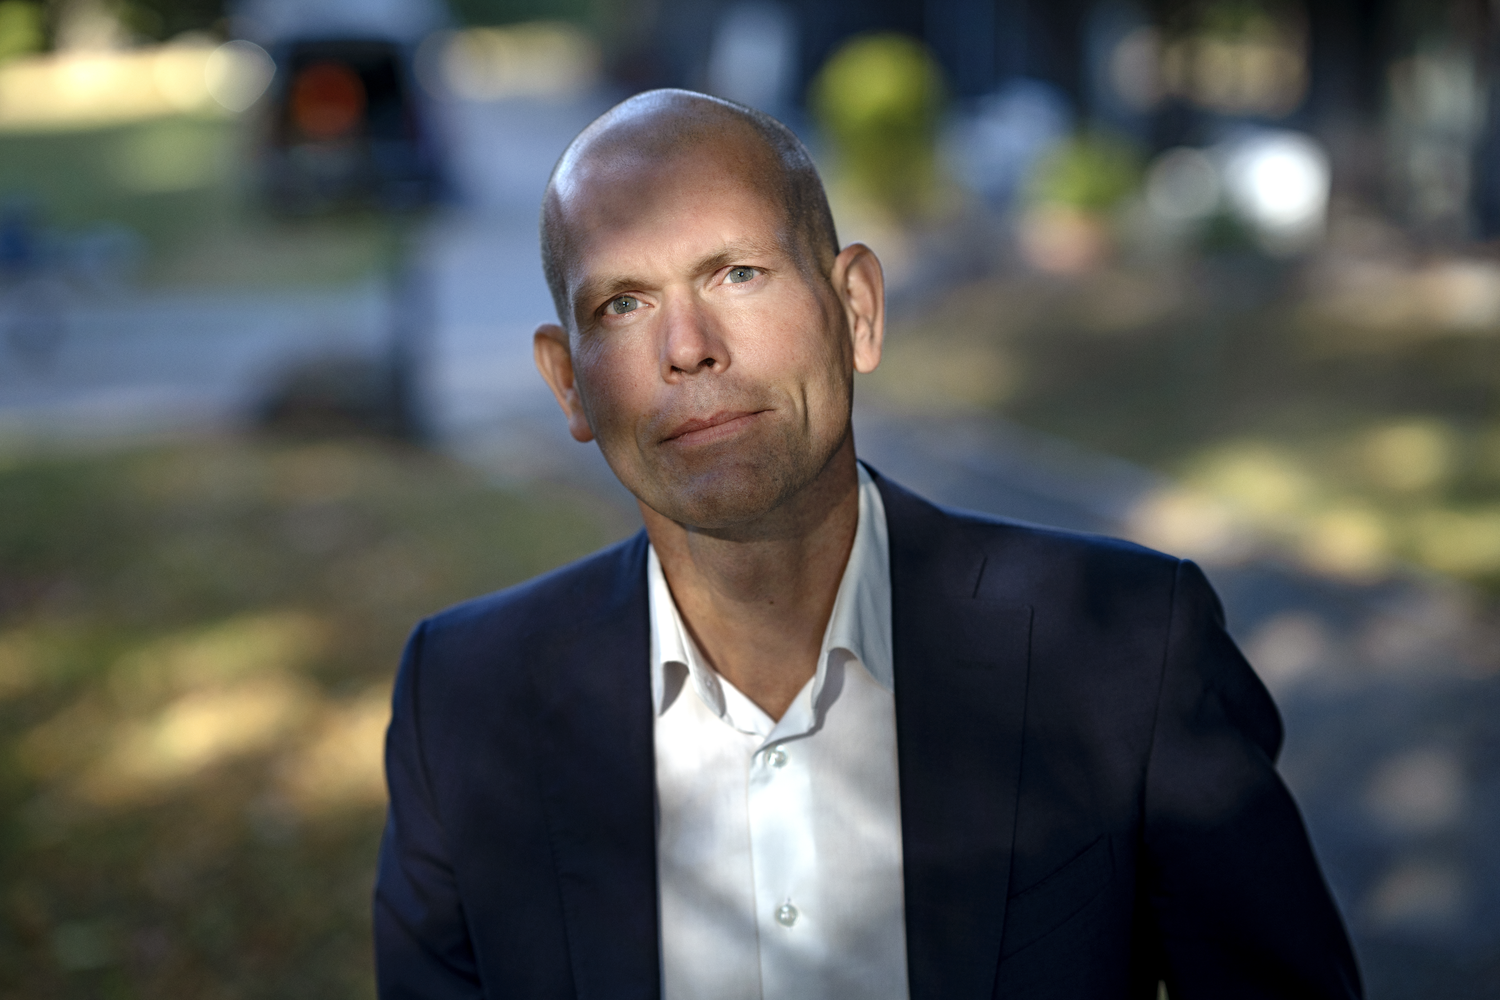 <p>Interview about the ObsERV platform with Per Norlén</p>